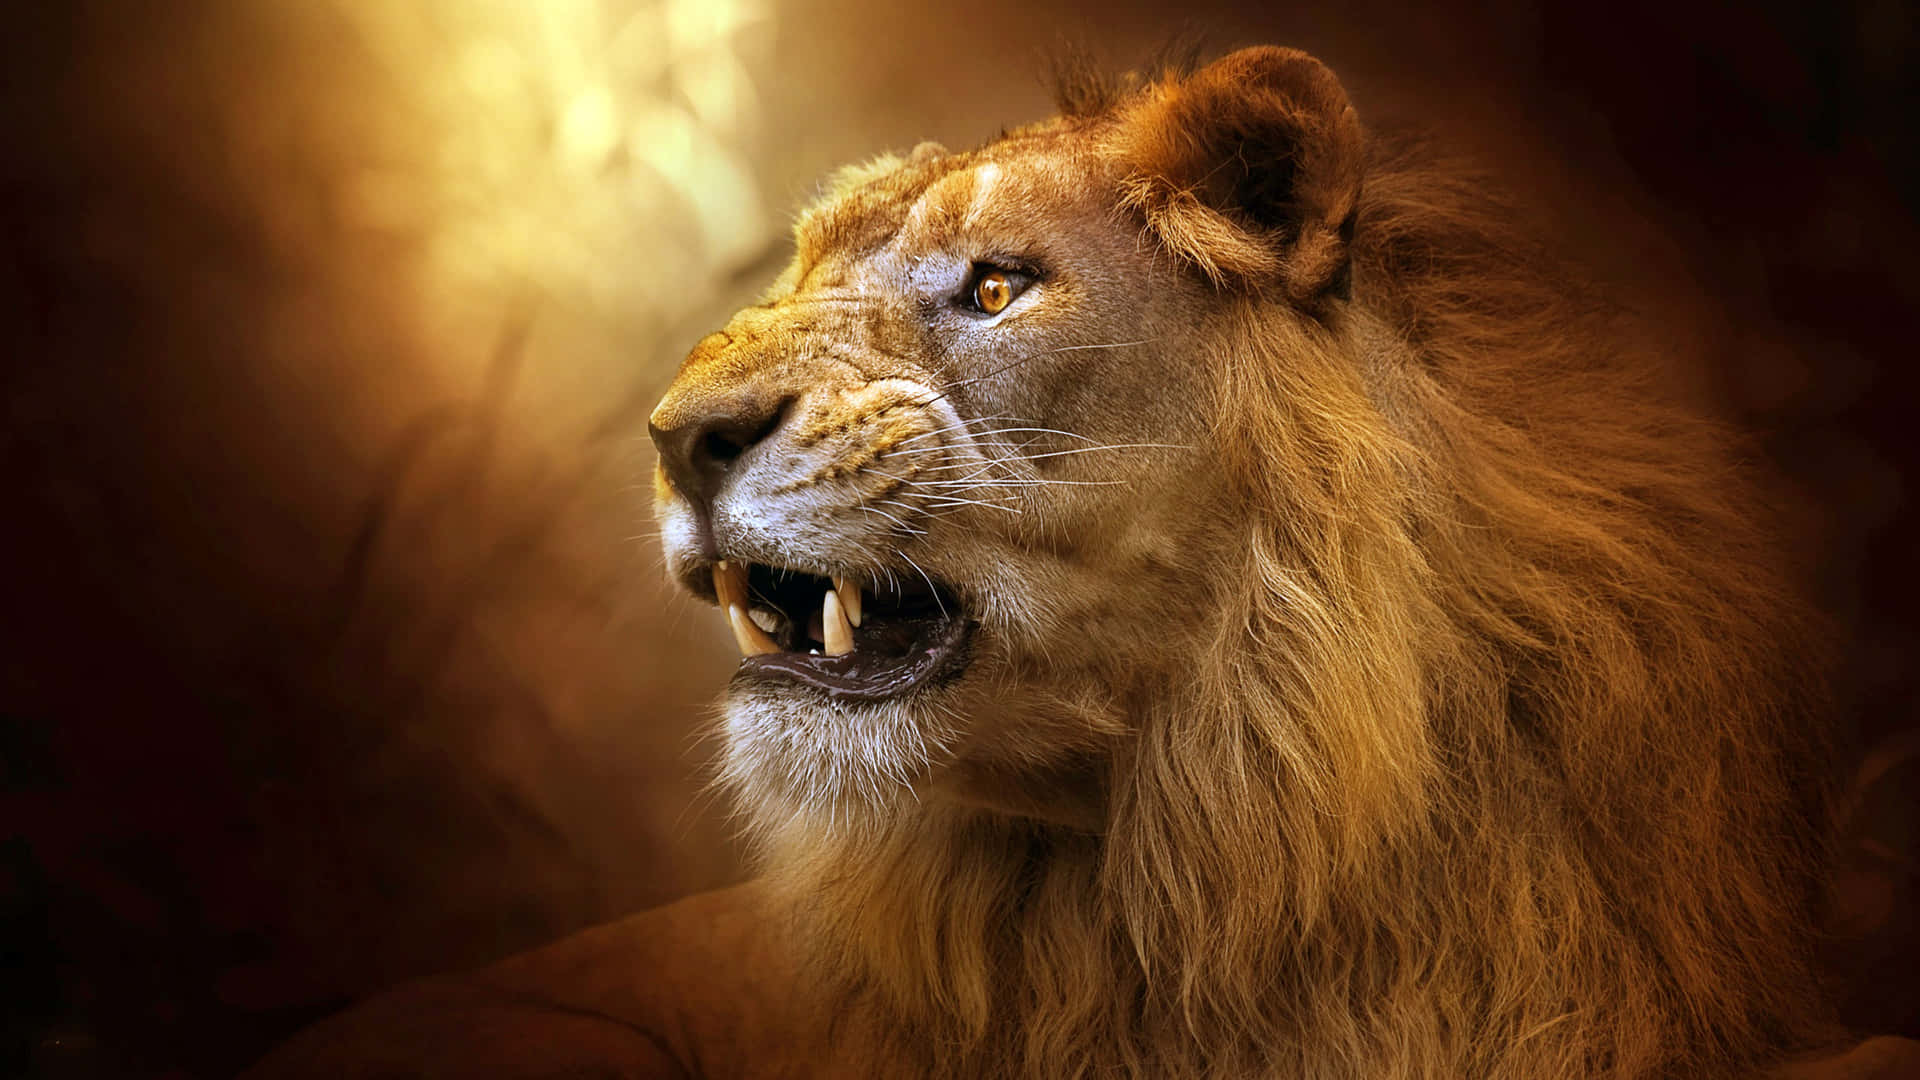 “Brave and Powerful, the Roaring Lion” Wallpaper